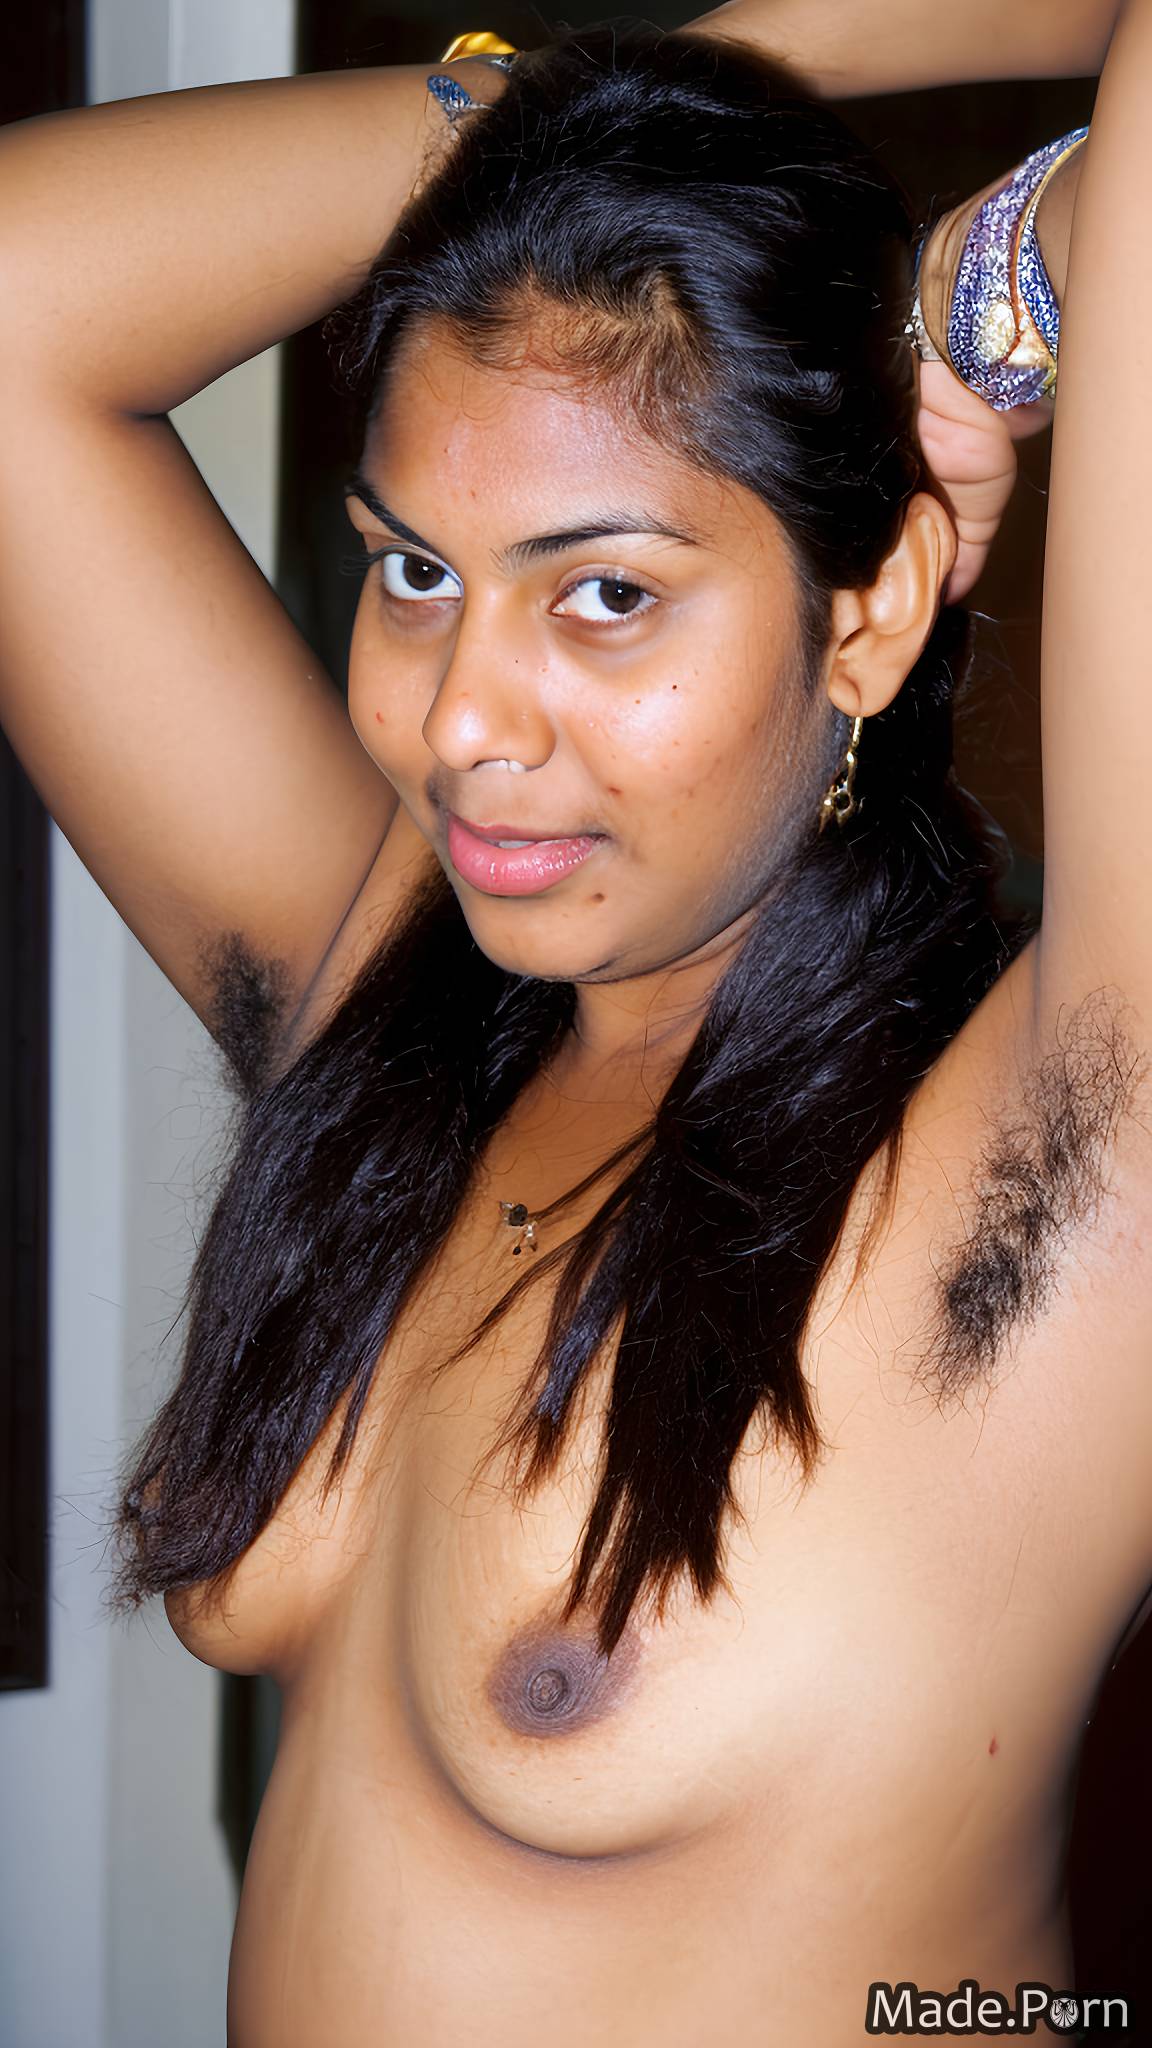 woman photo hairy 20 looking at viewer armpits indian created by AI